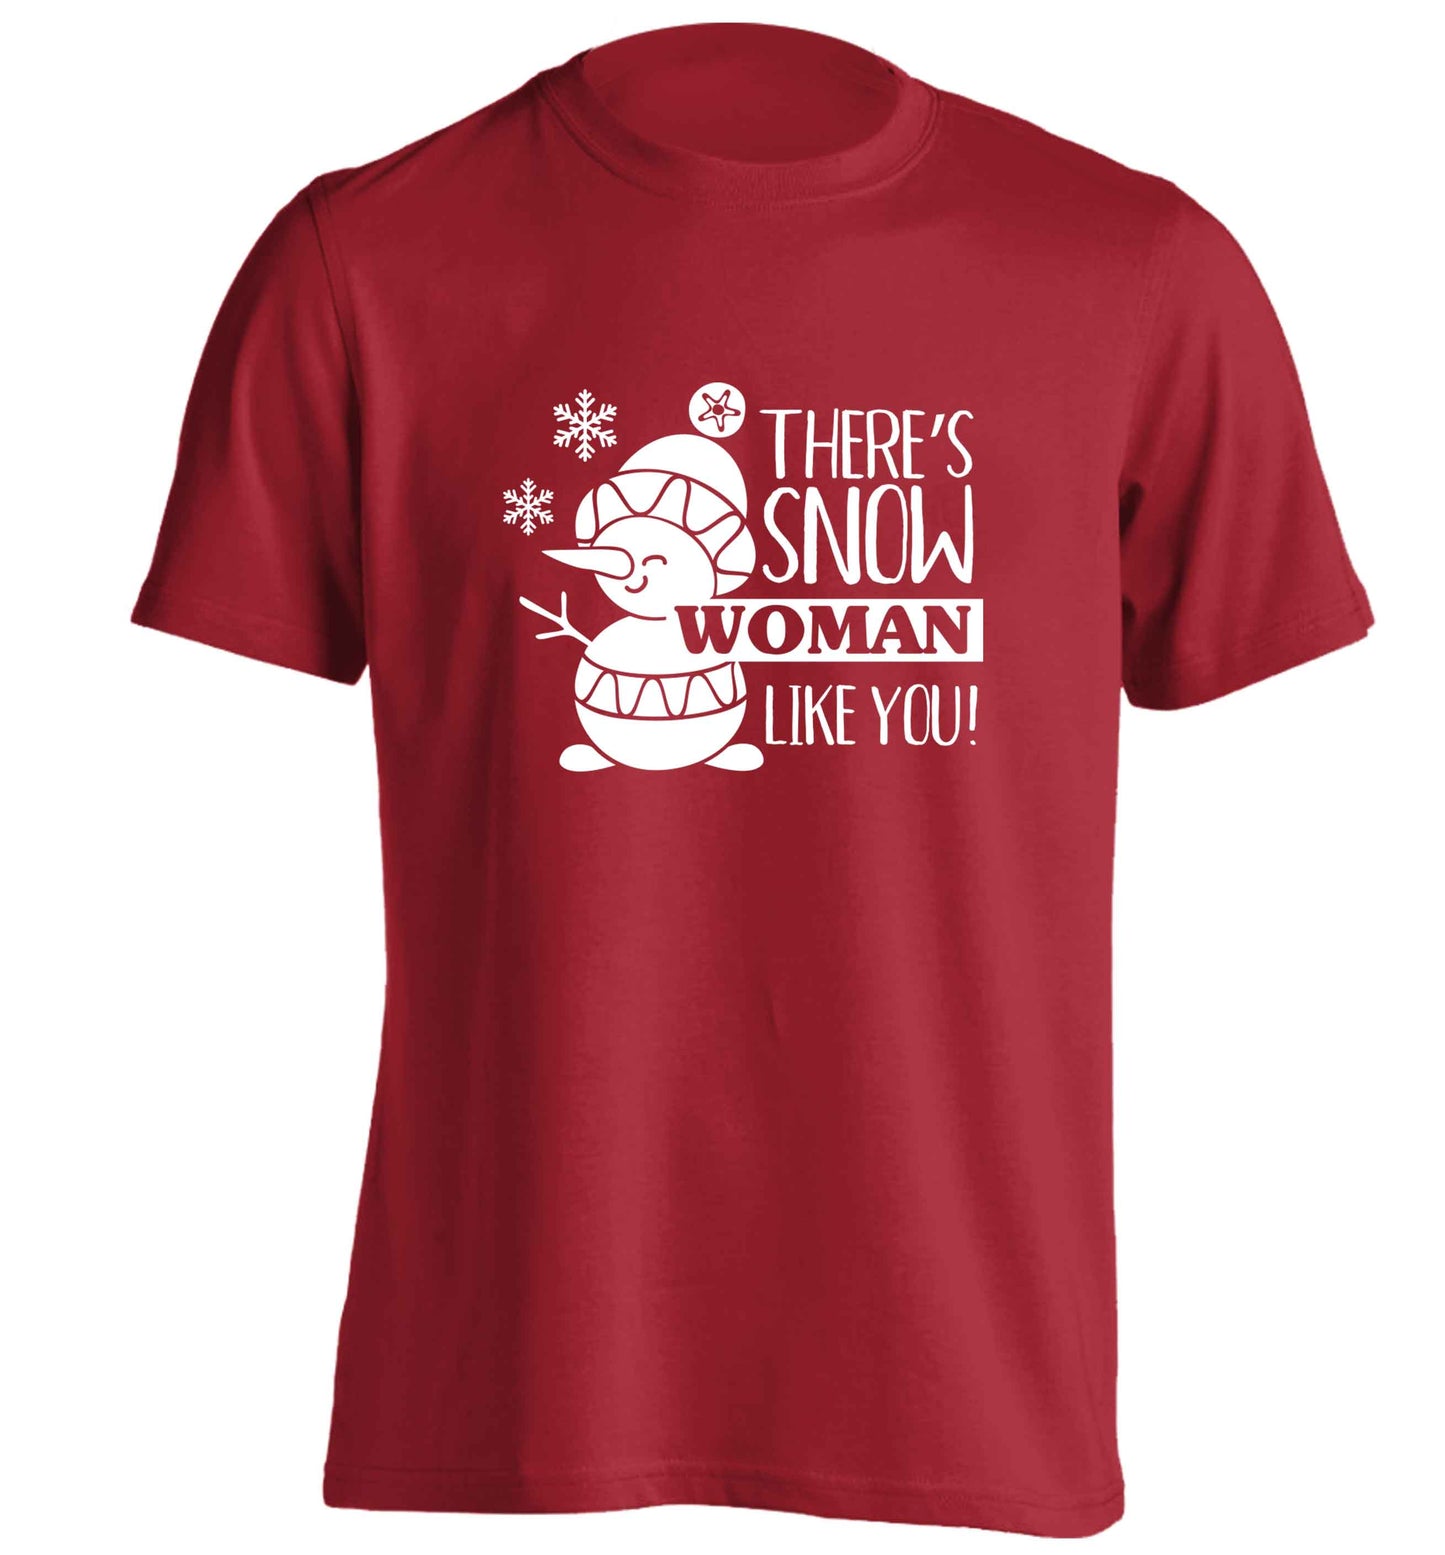 There's snow woman like you adults unisex red Tshirt 2XL